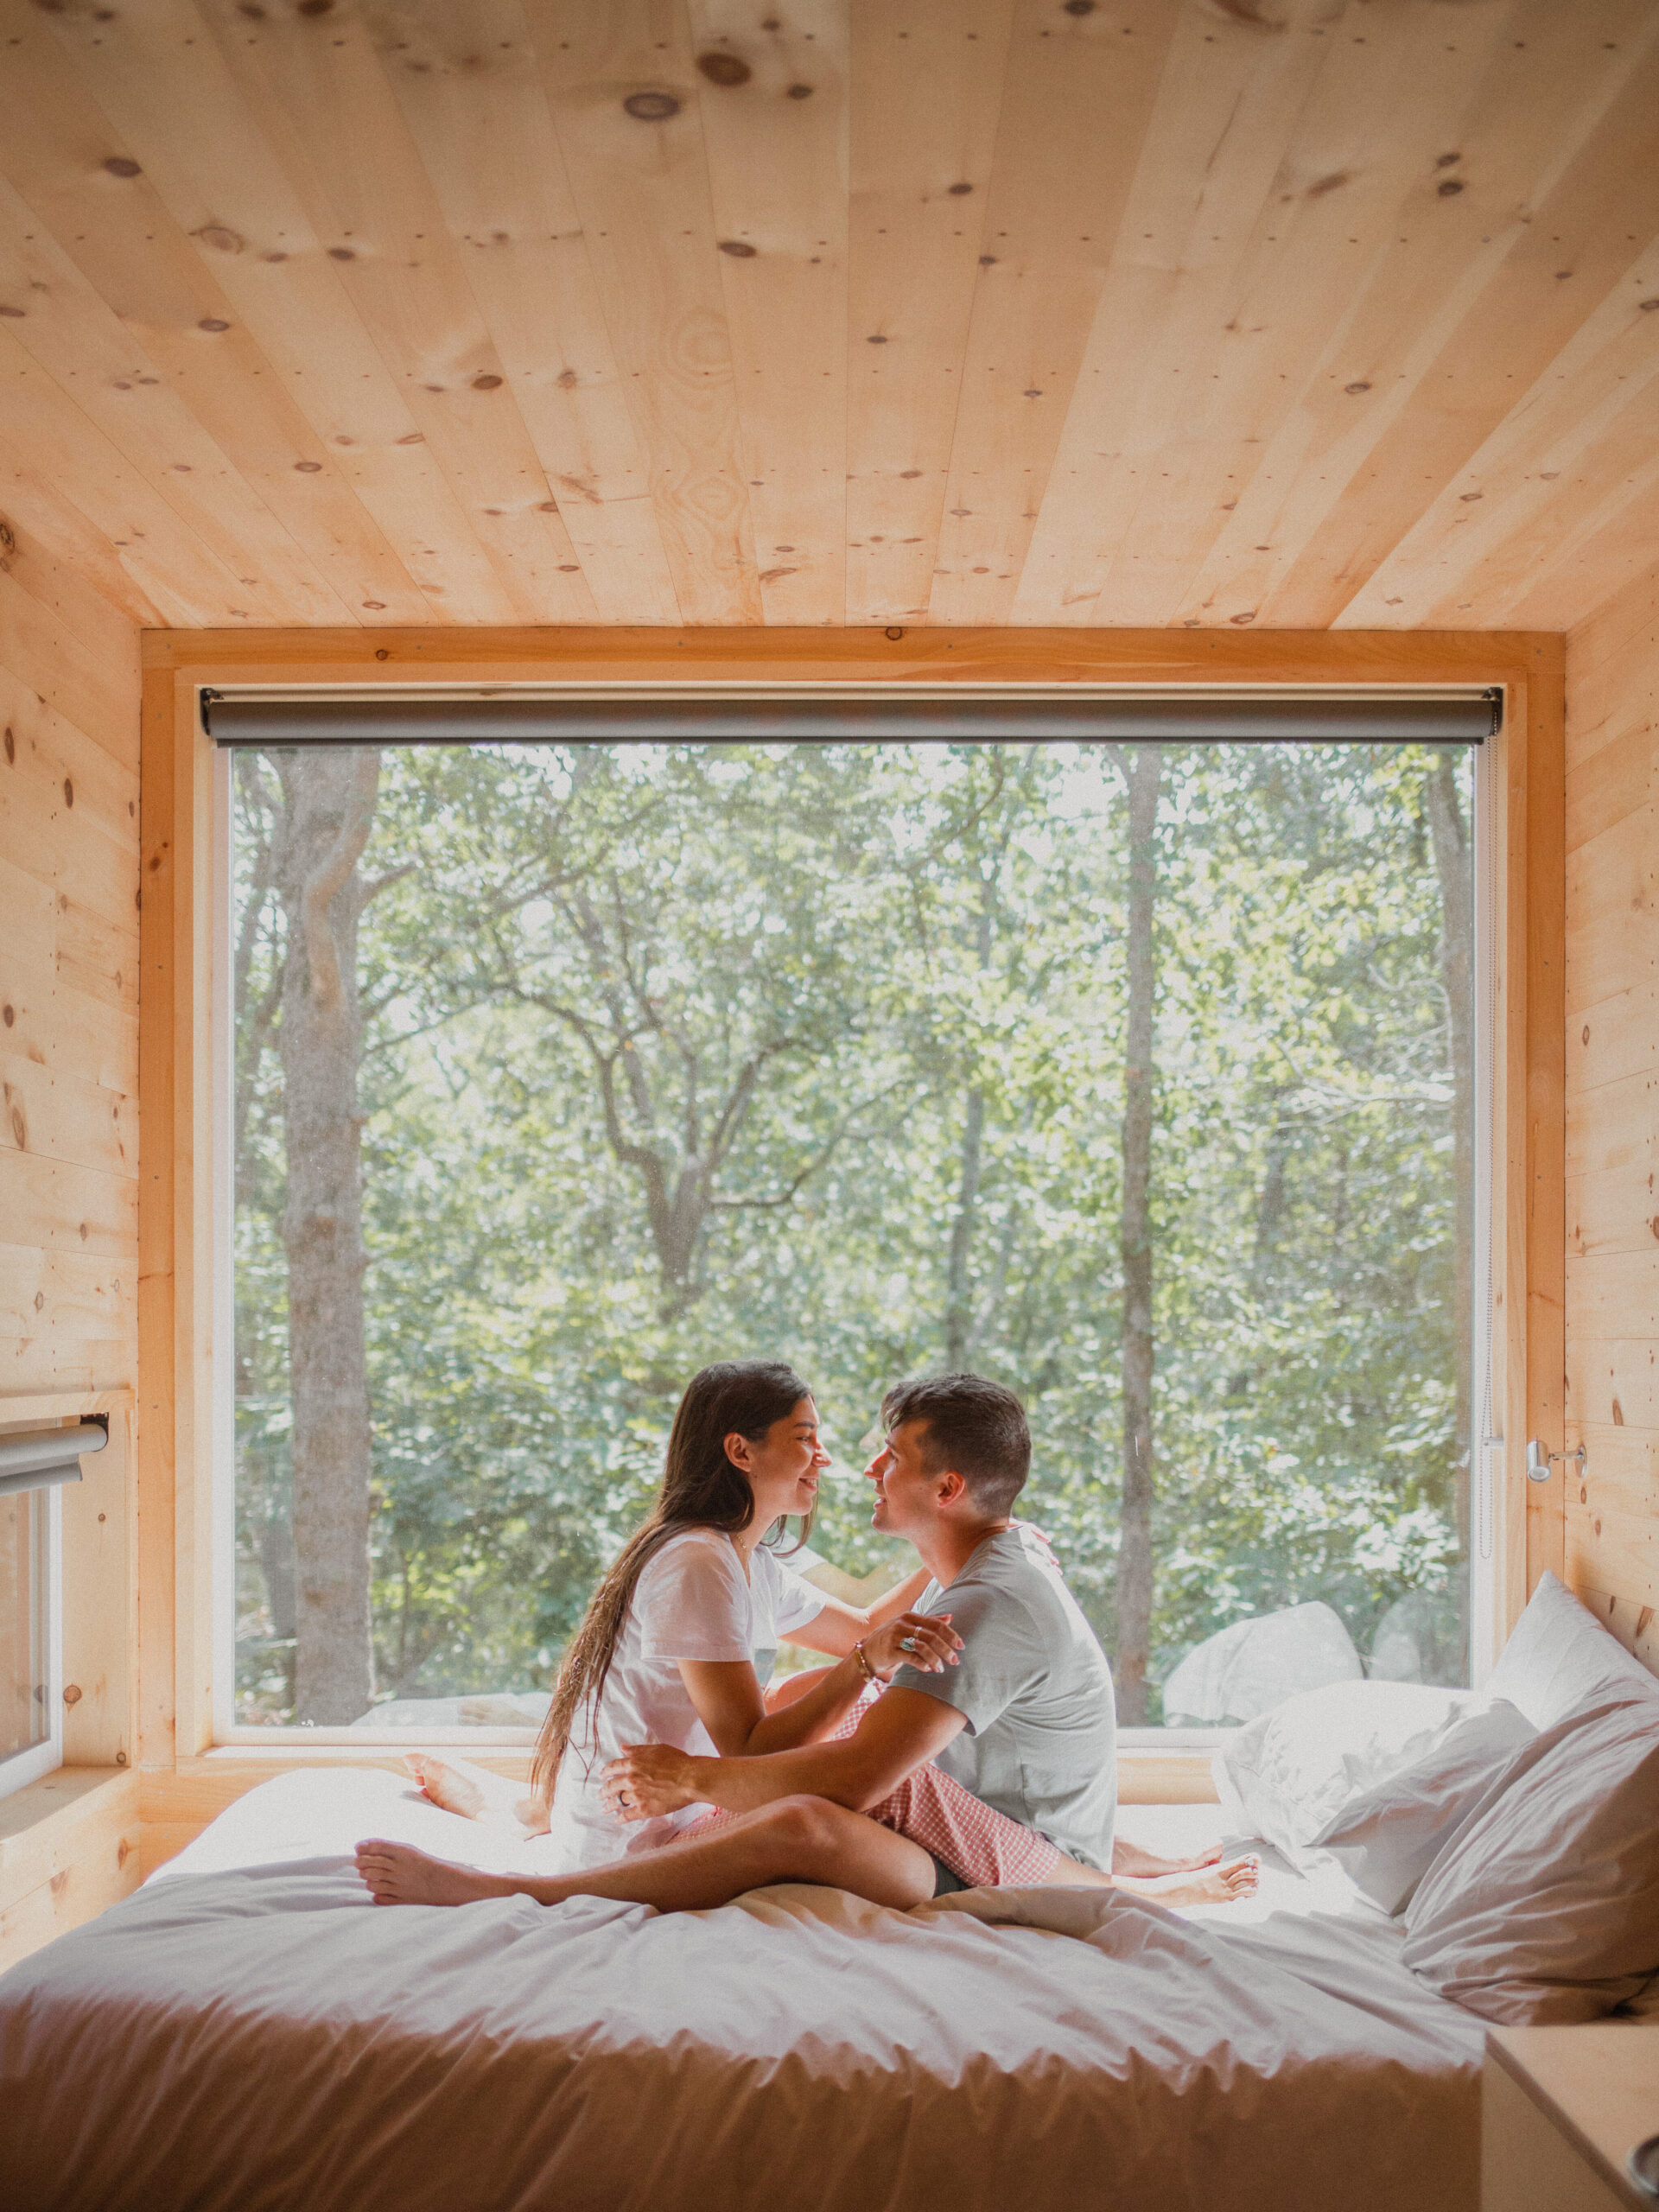 A couple snuggling on a bed in a Getaway Tiny Cabin.